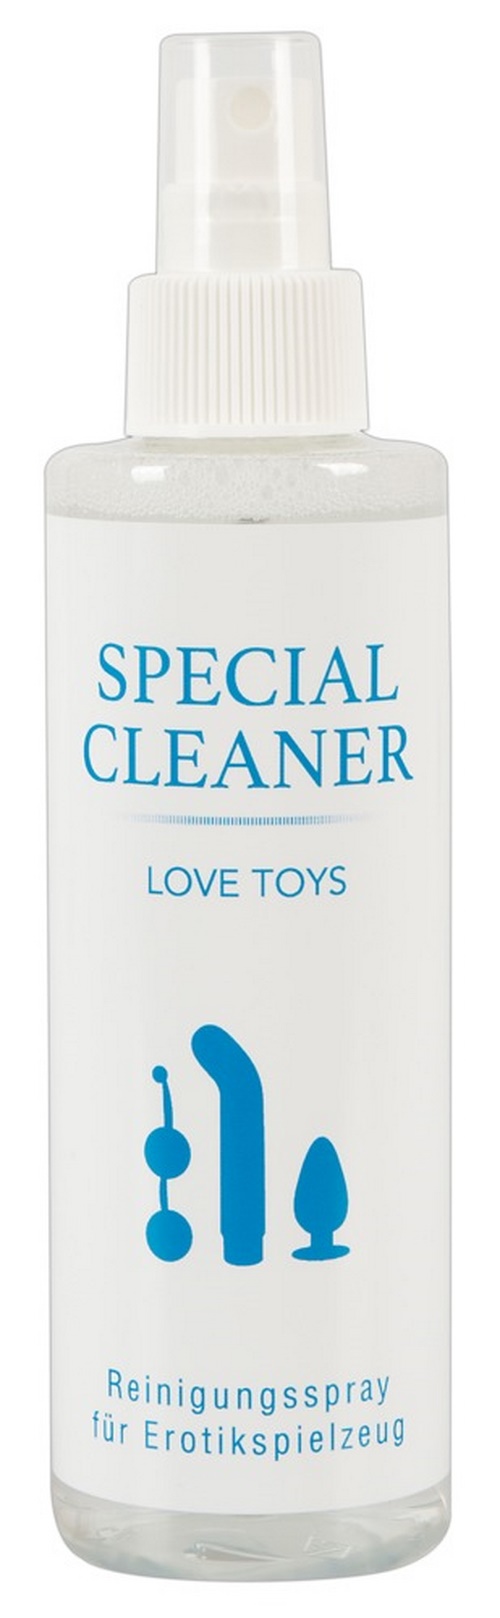 Special cleaner